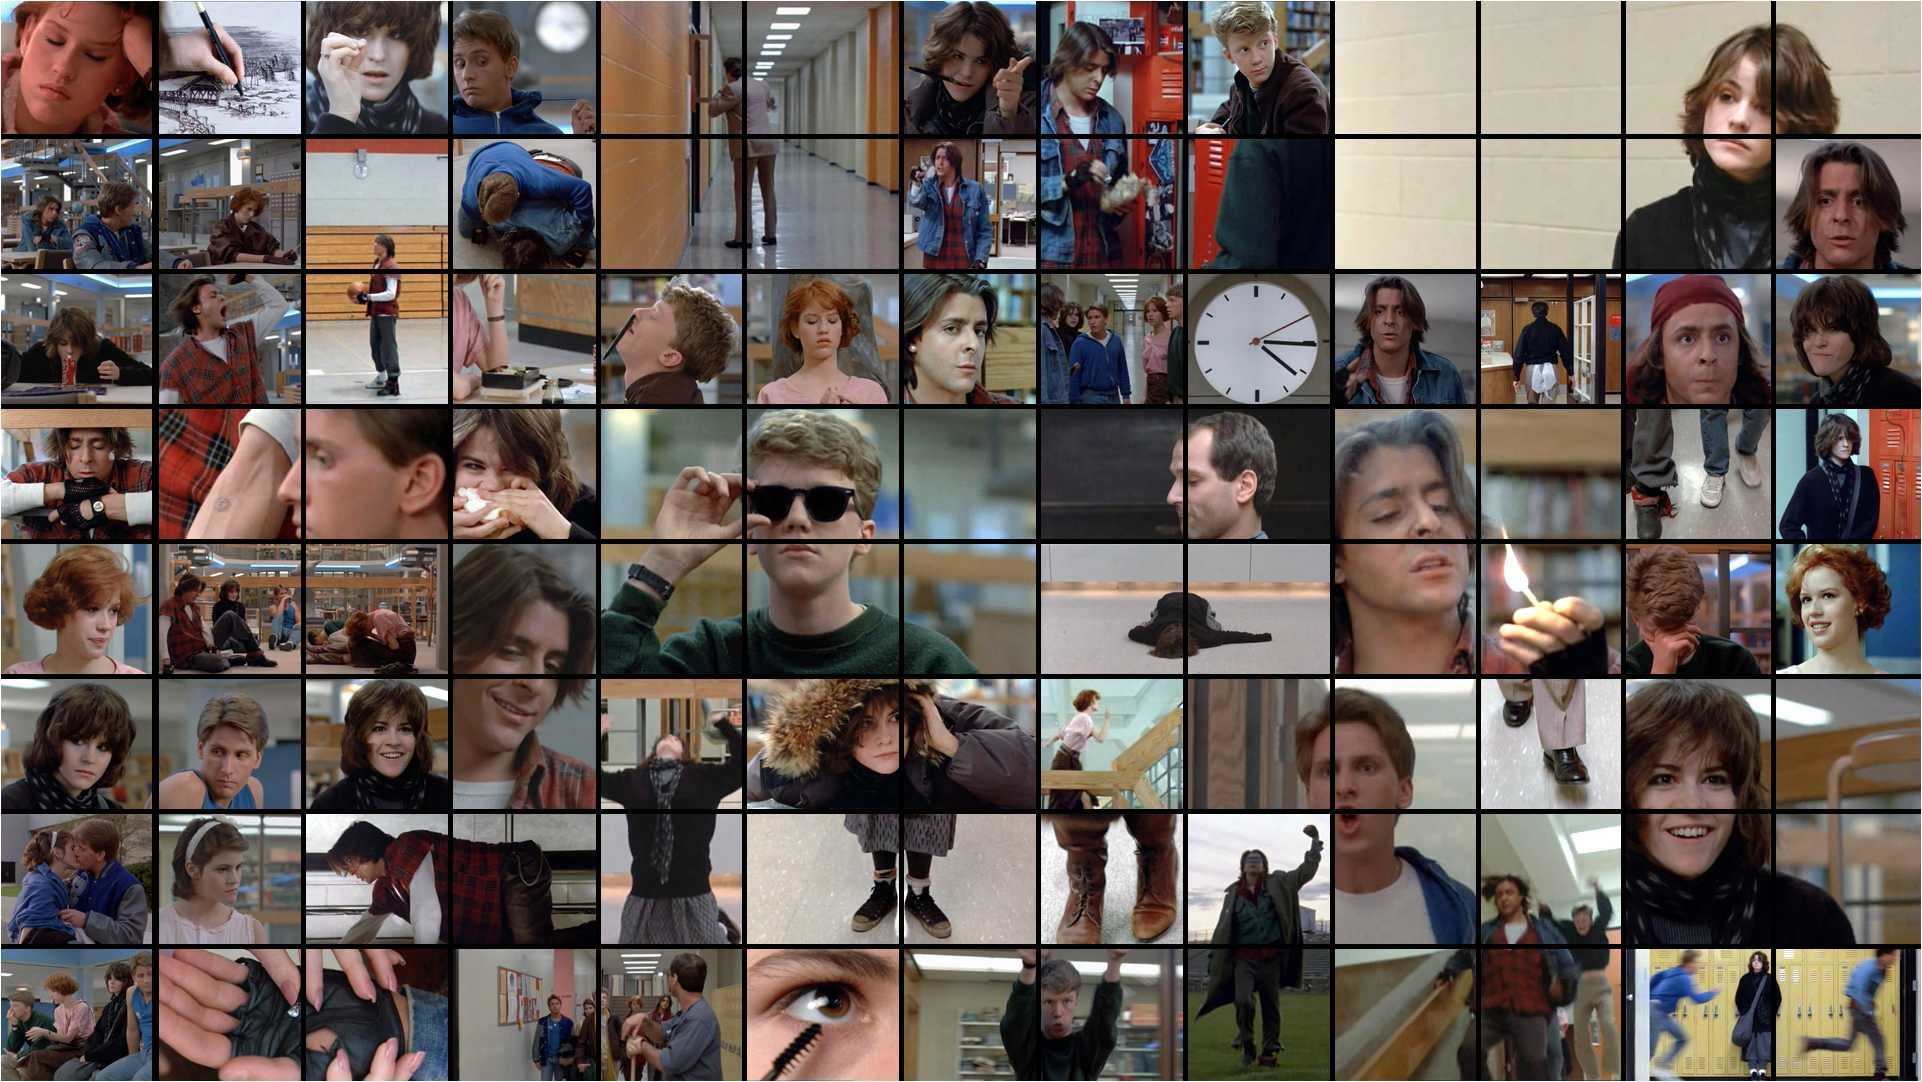 1922x1082 1920x1080 px The Breakfast Club Widescreen Image | Cool Pics, v.668